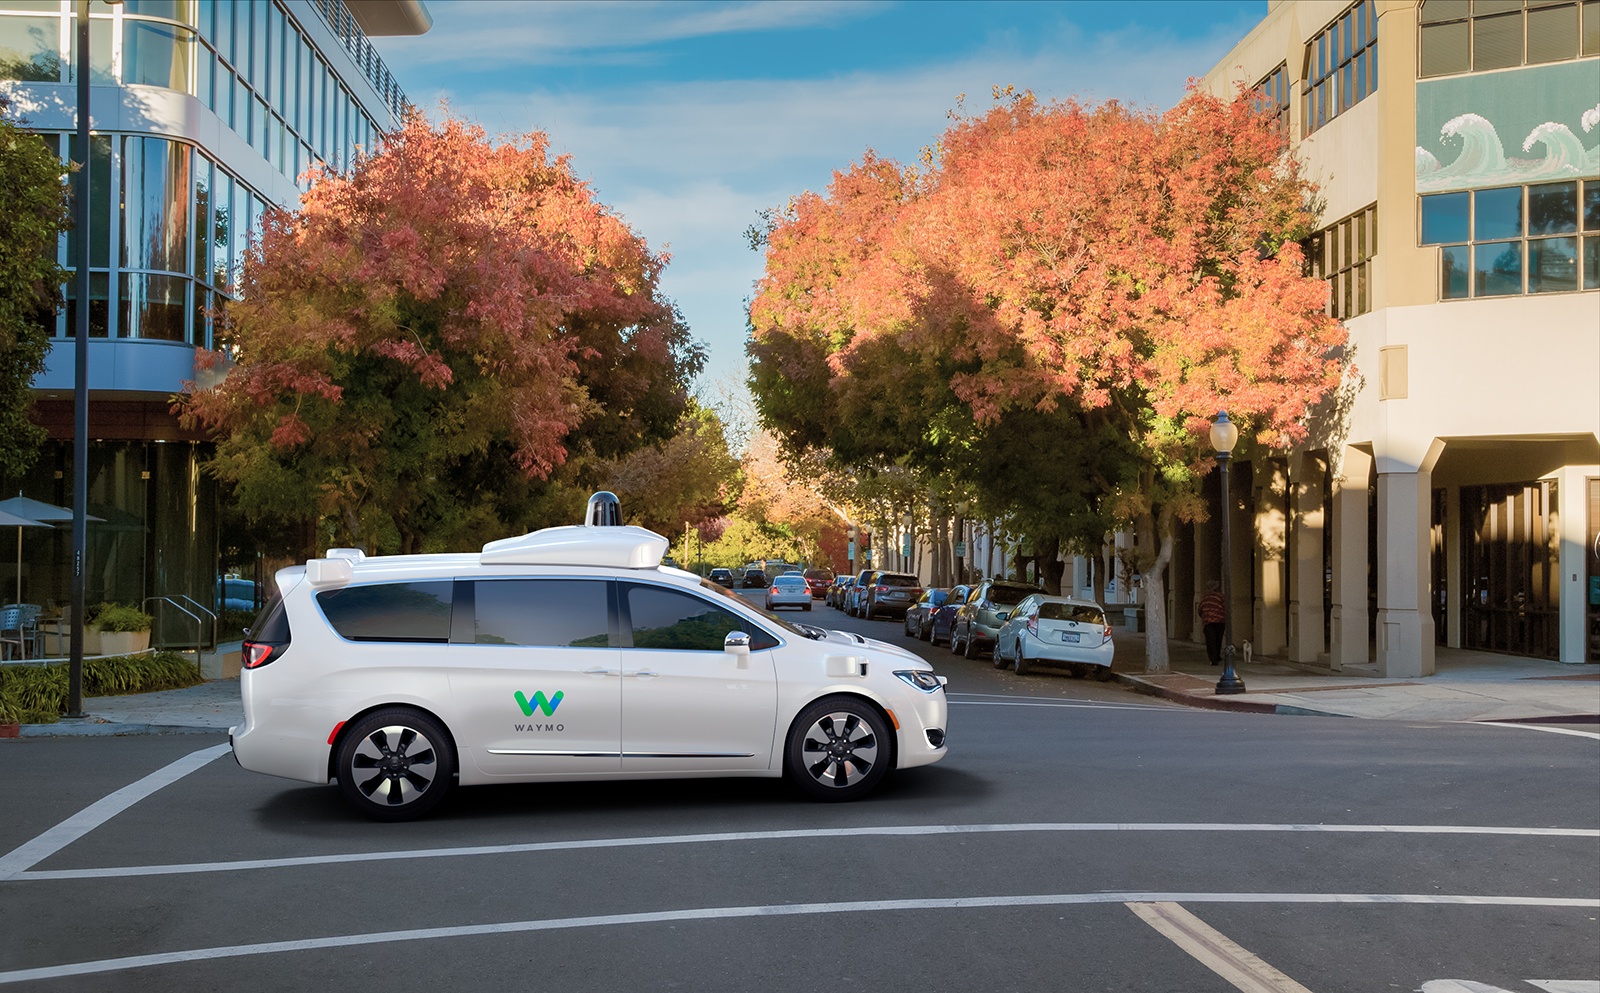 white Waymo van in a city intersection